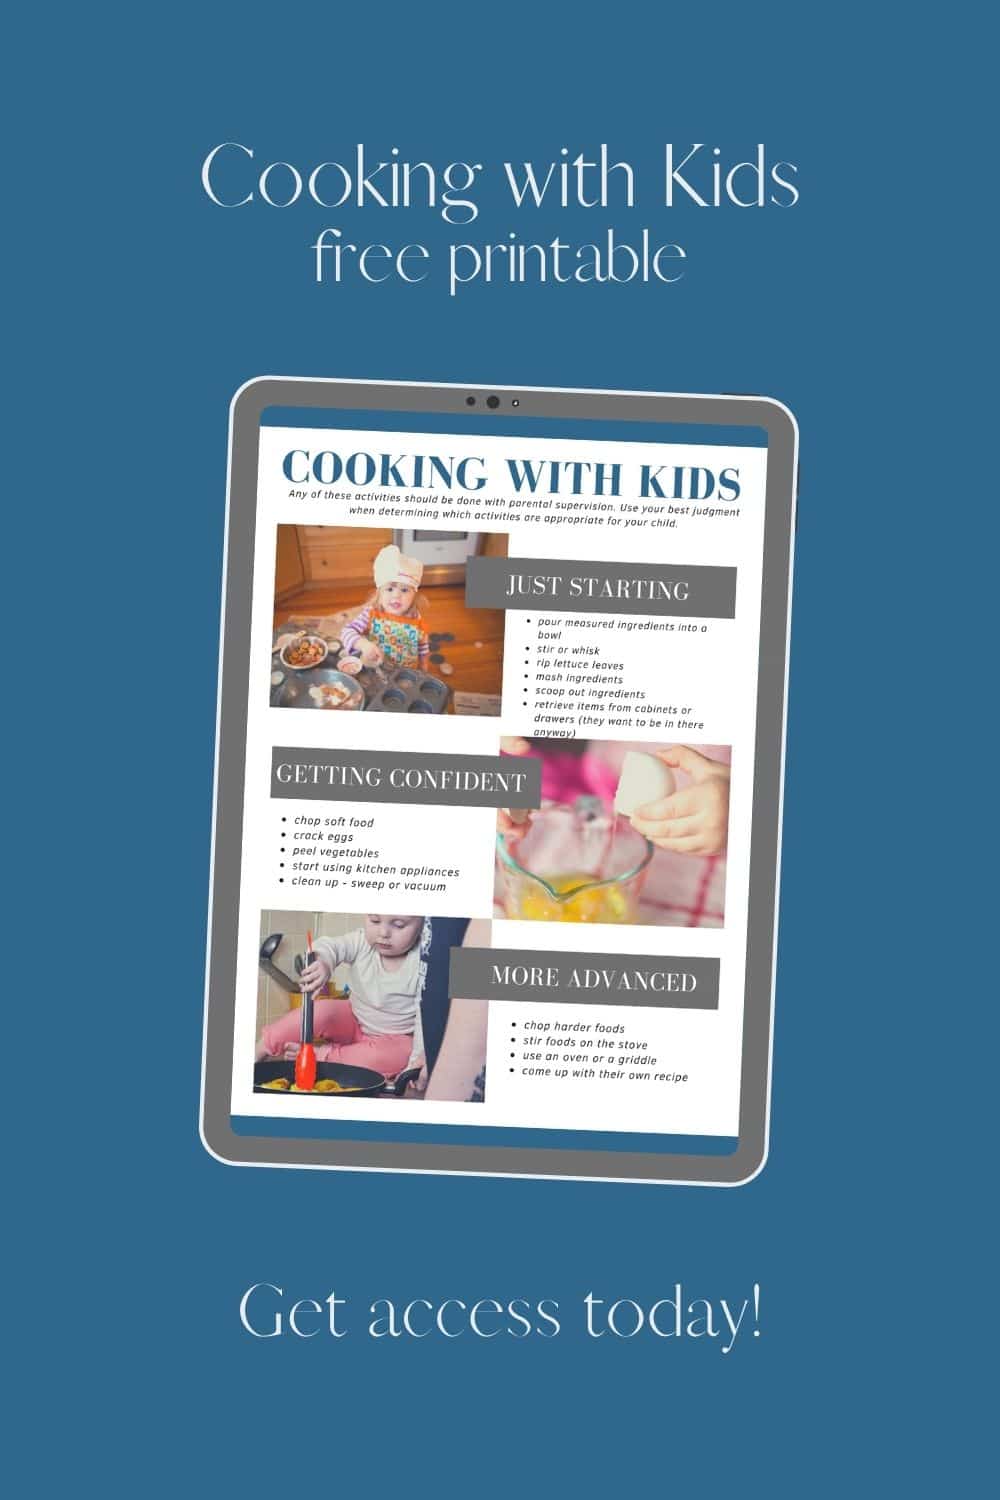 Cooking with Kids free printable text with image of the printable and text that reads get access today.